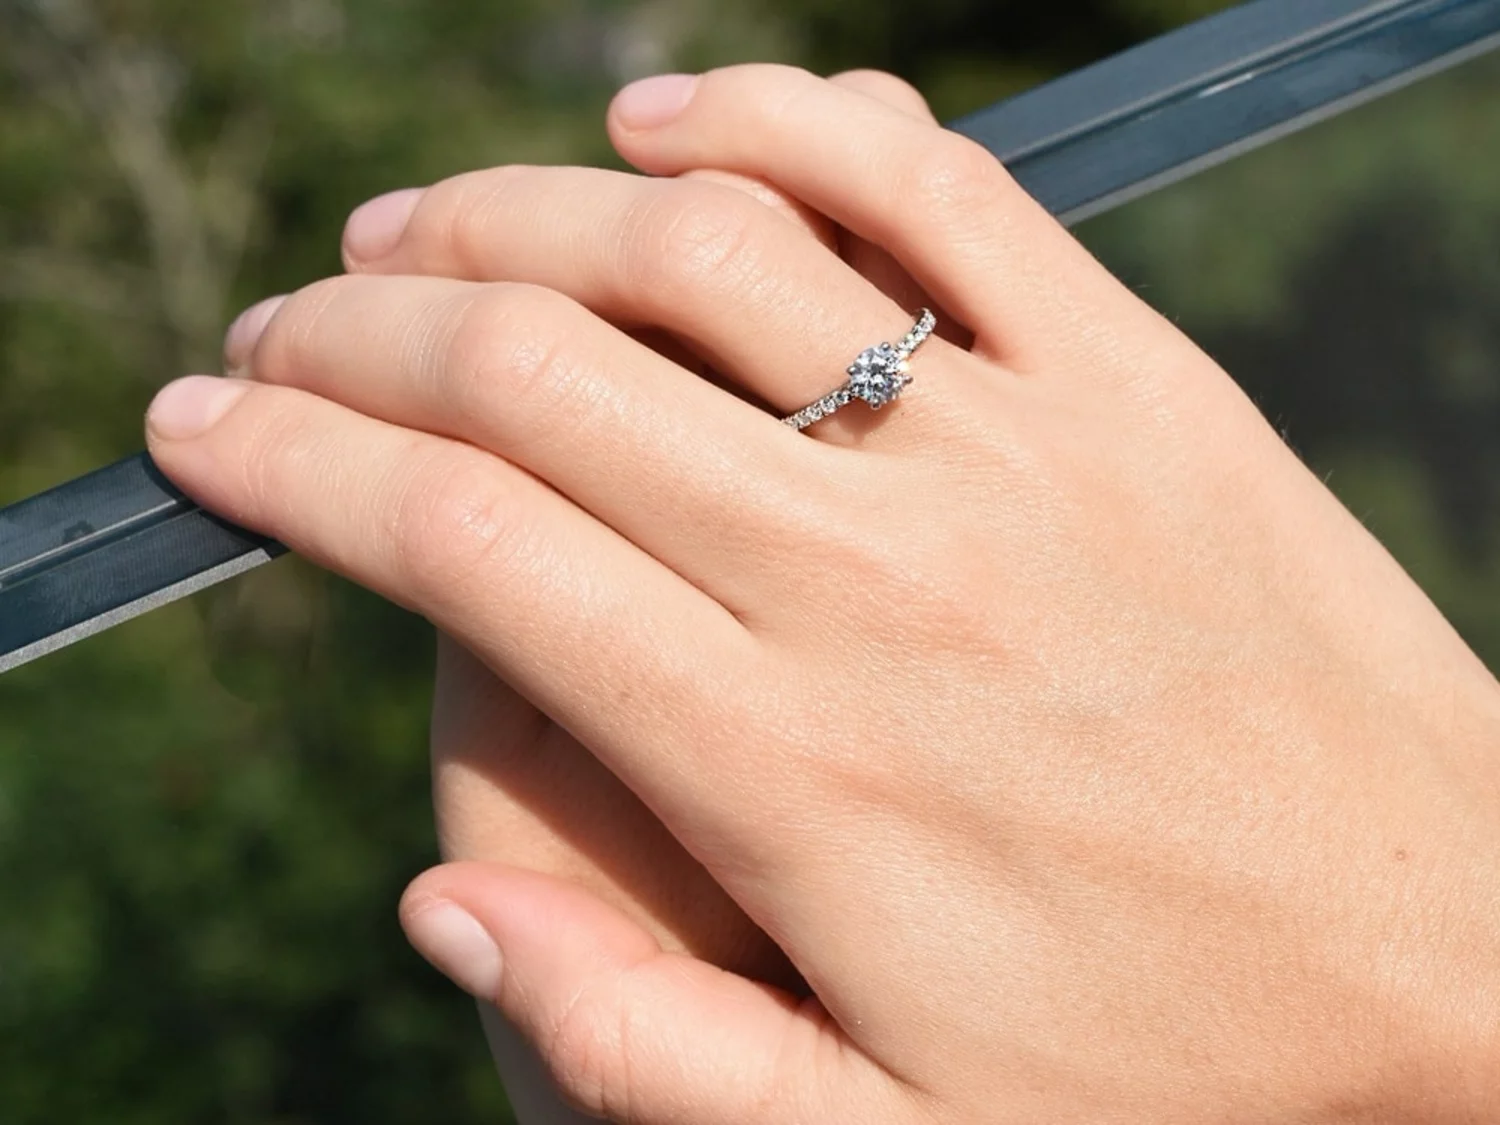 Purchase the High-Quality Tension Engagement Rings